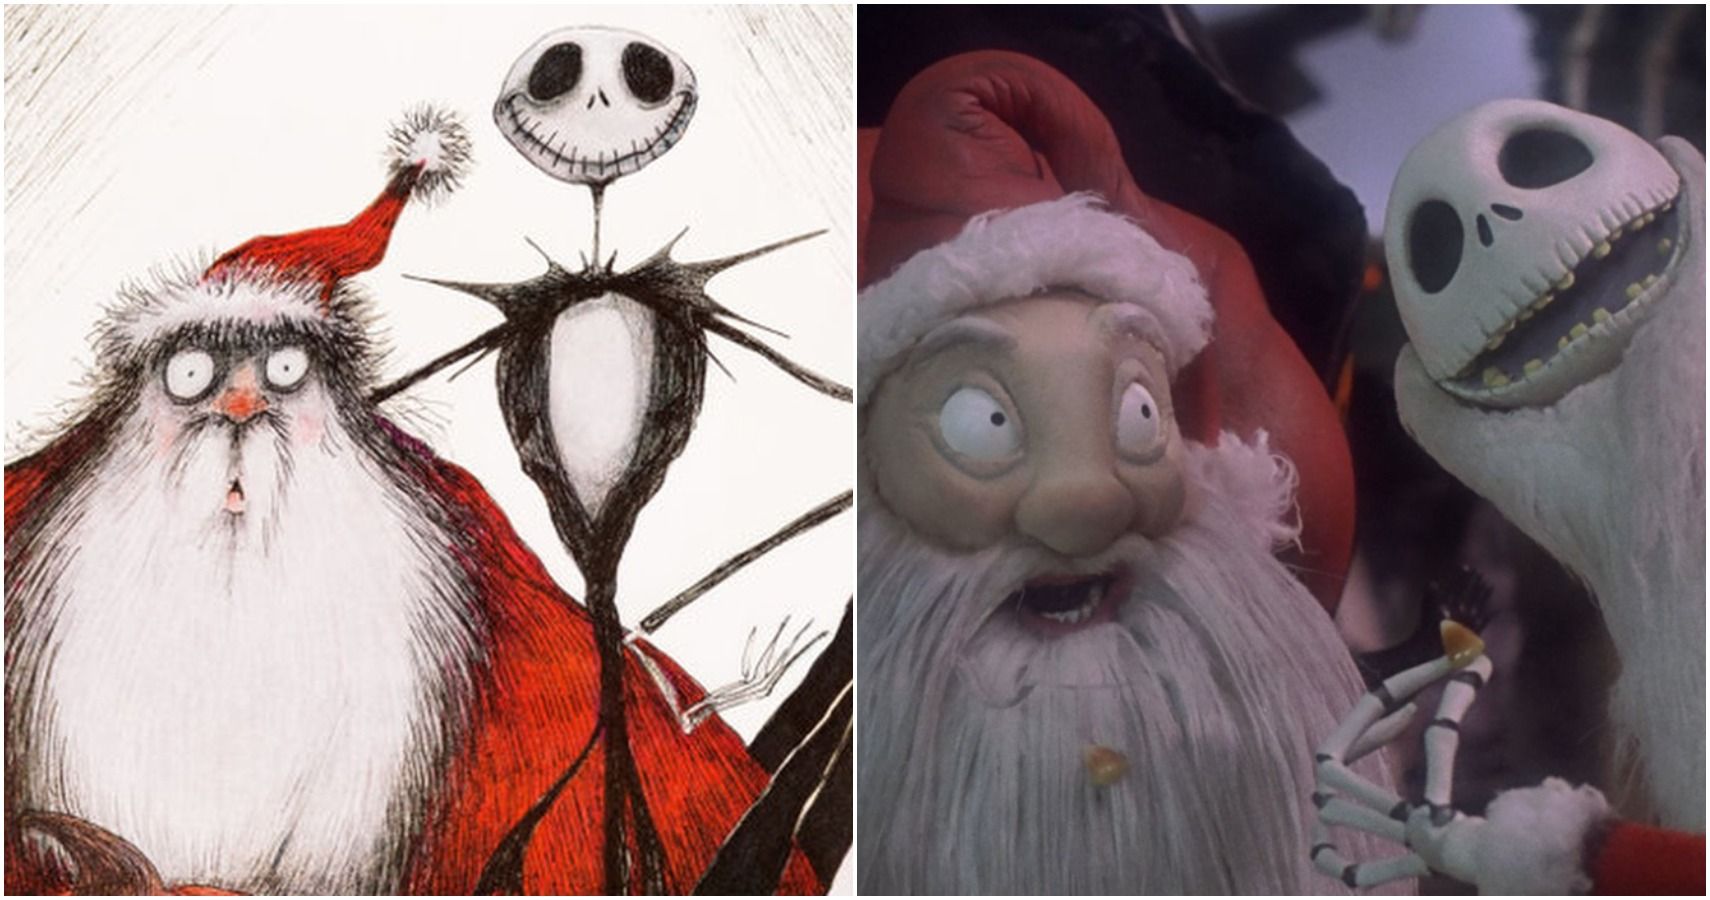 The Nightmare Before Christmas: 10 Differences Between The Film